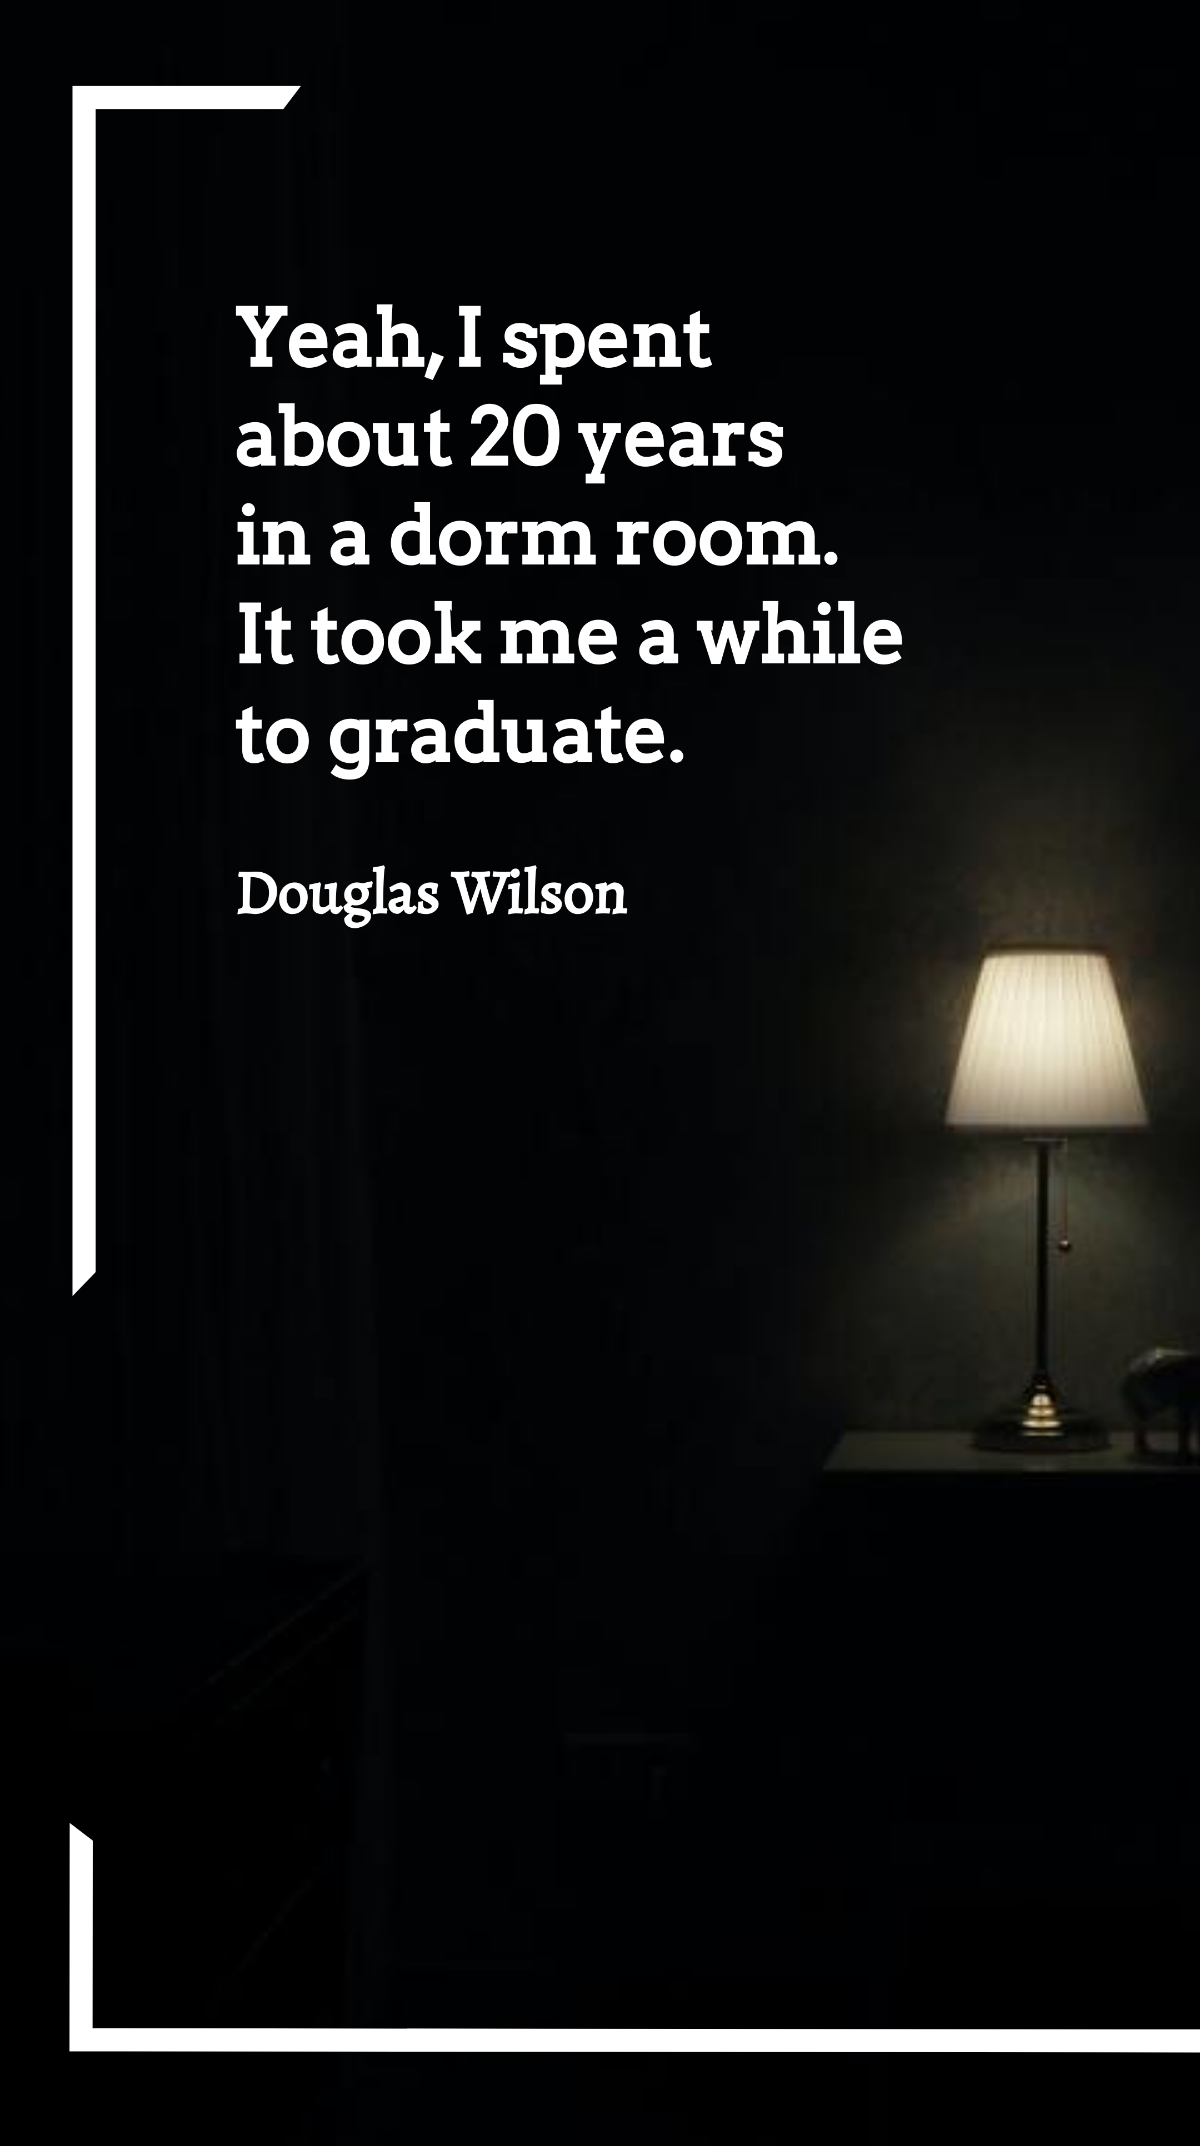 Free Douglas Wilson - Yeah, I spent about 20 years in a dorm room. It took me a while to graduate. Template